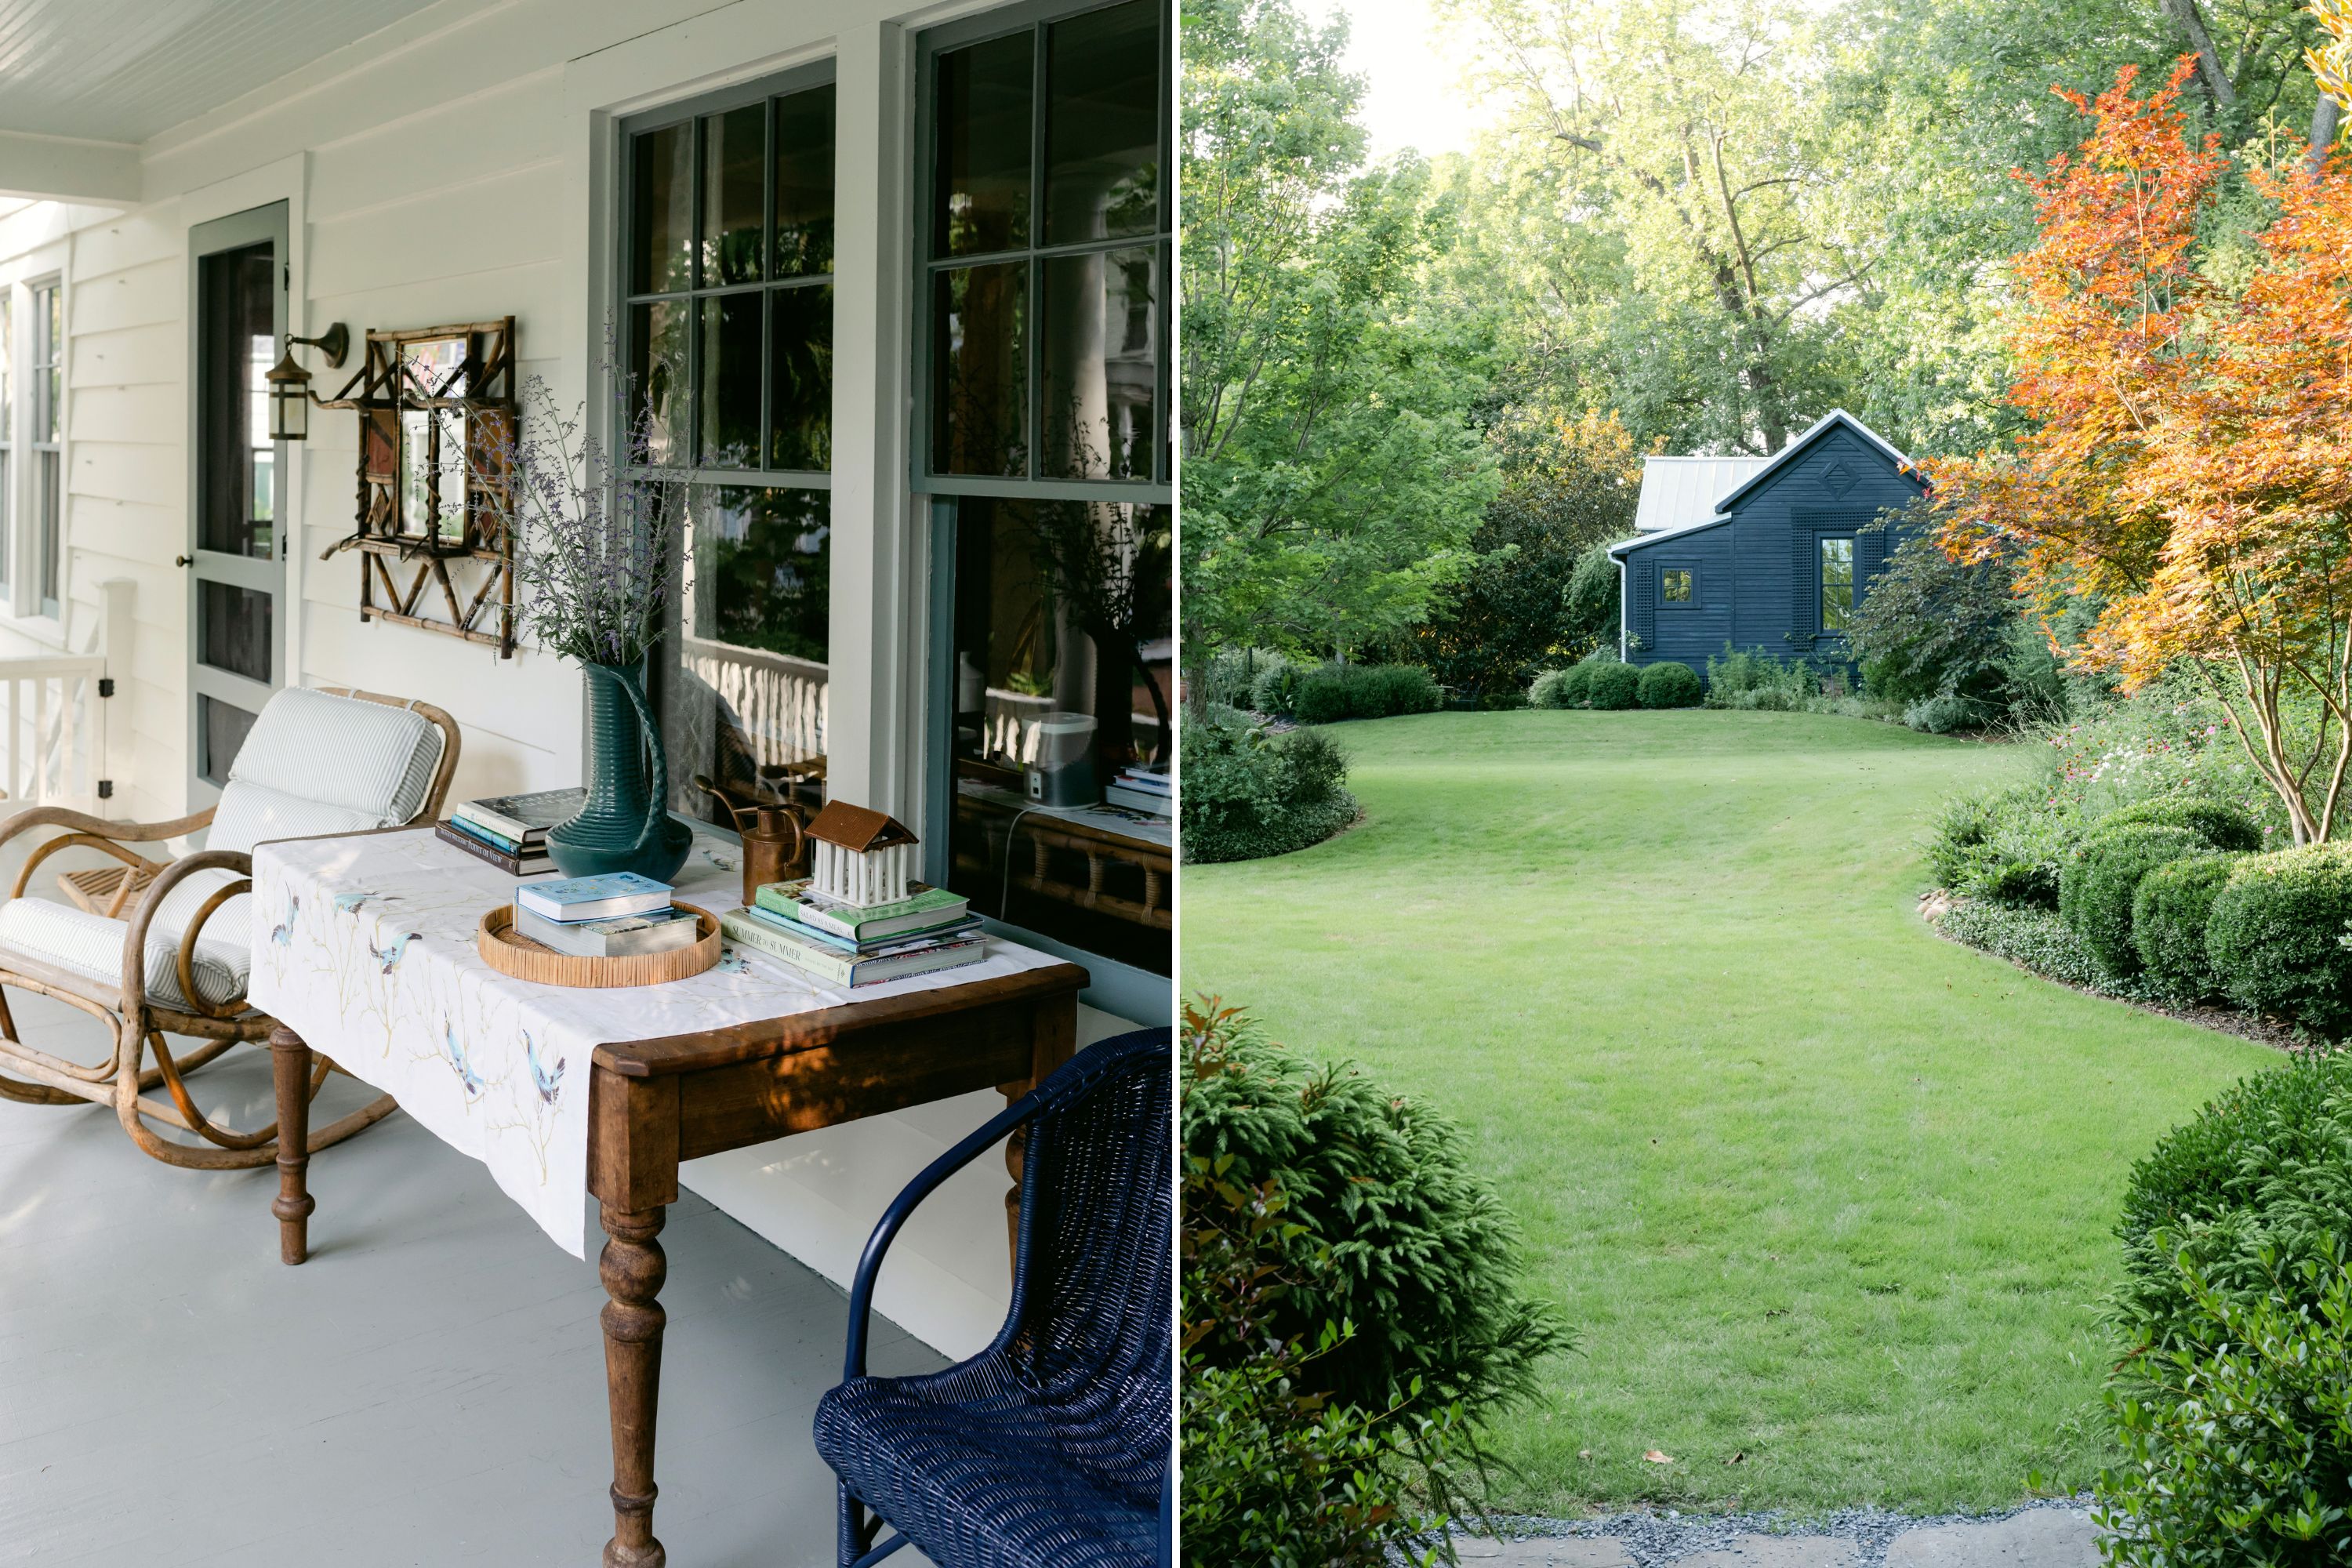 A collage of two images: A porch with seating; a lush garden with a barn-like studio.